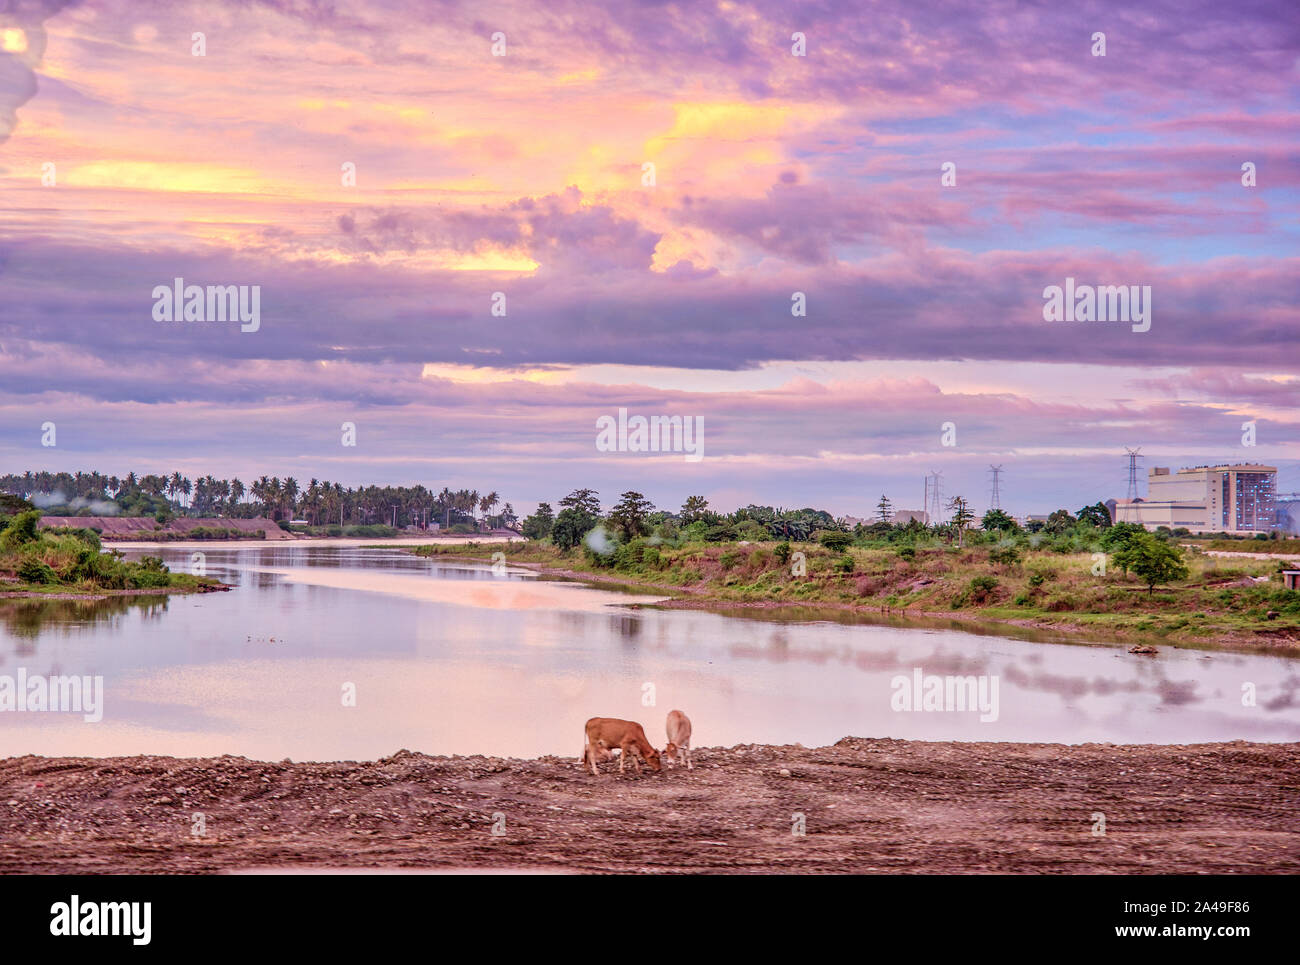 Sunset at Tagoloan River at Misamis Oriental, Philippines. Stock Photo